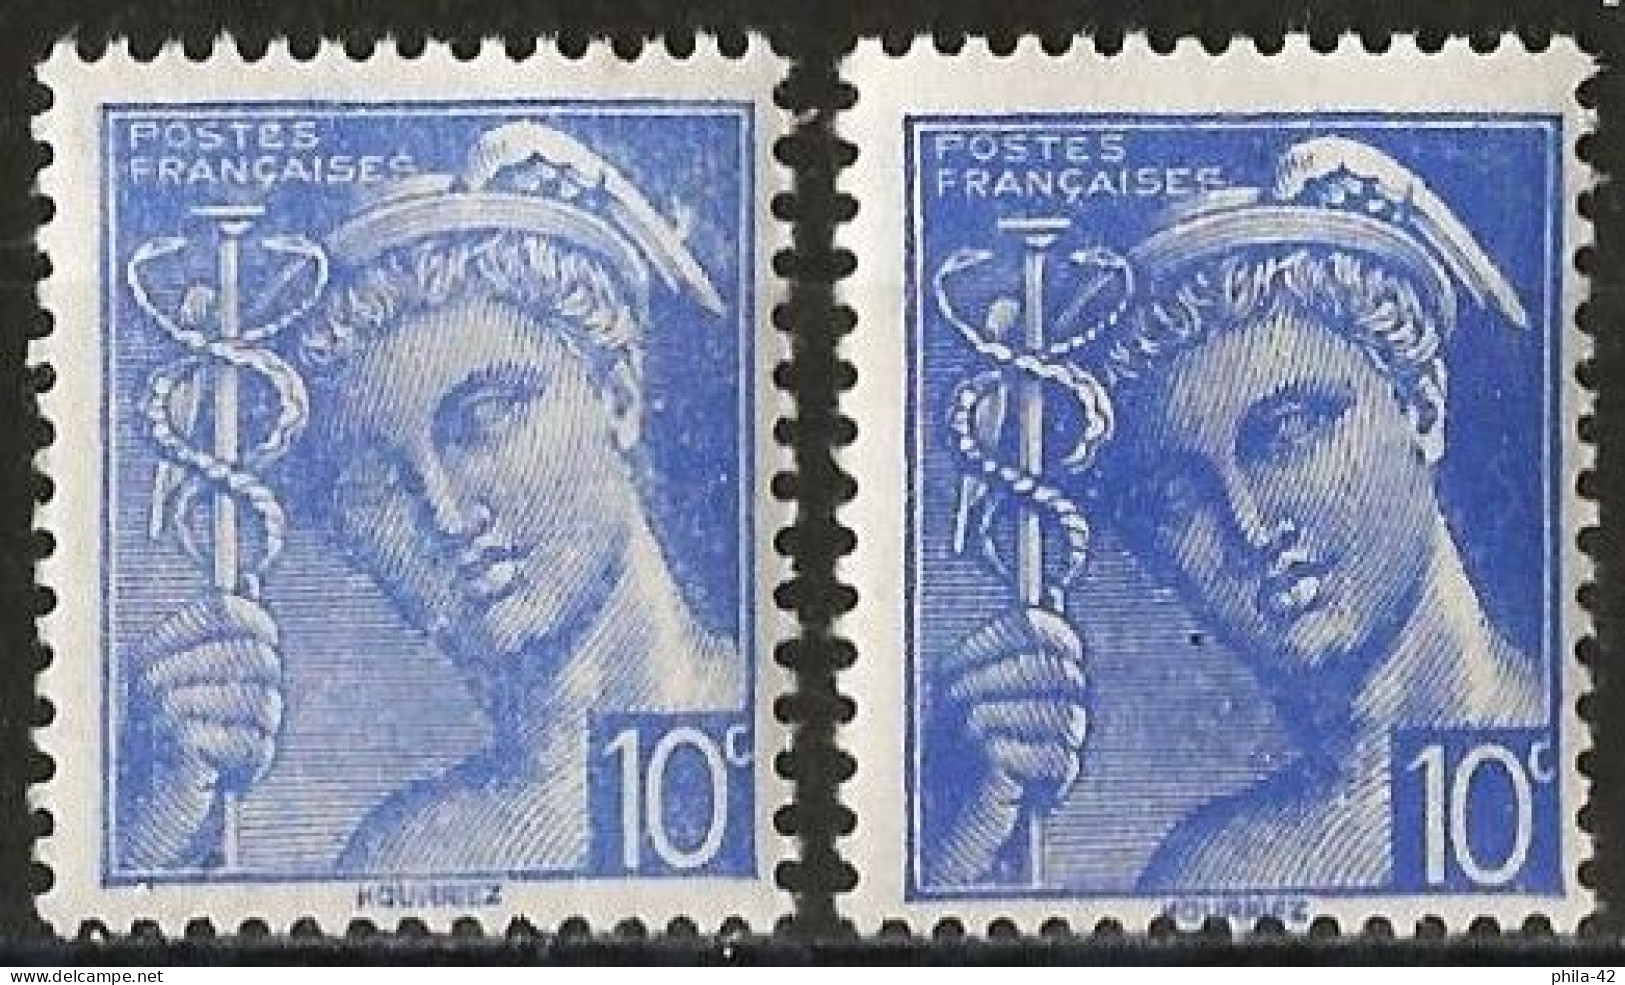 France 1942 - Mi 557 - YT 546 ( Mercure ) MNH** - Two Shades Of Color - 1938-42 Mercure